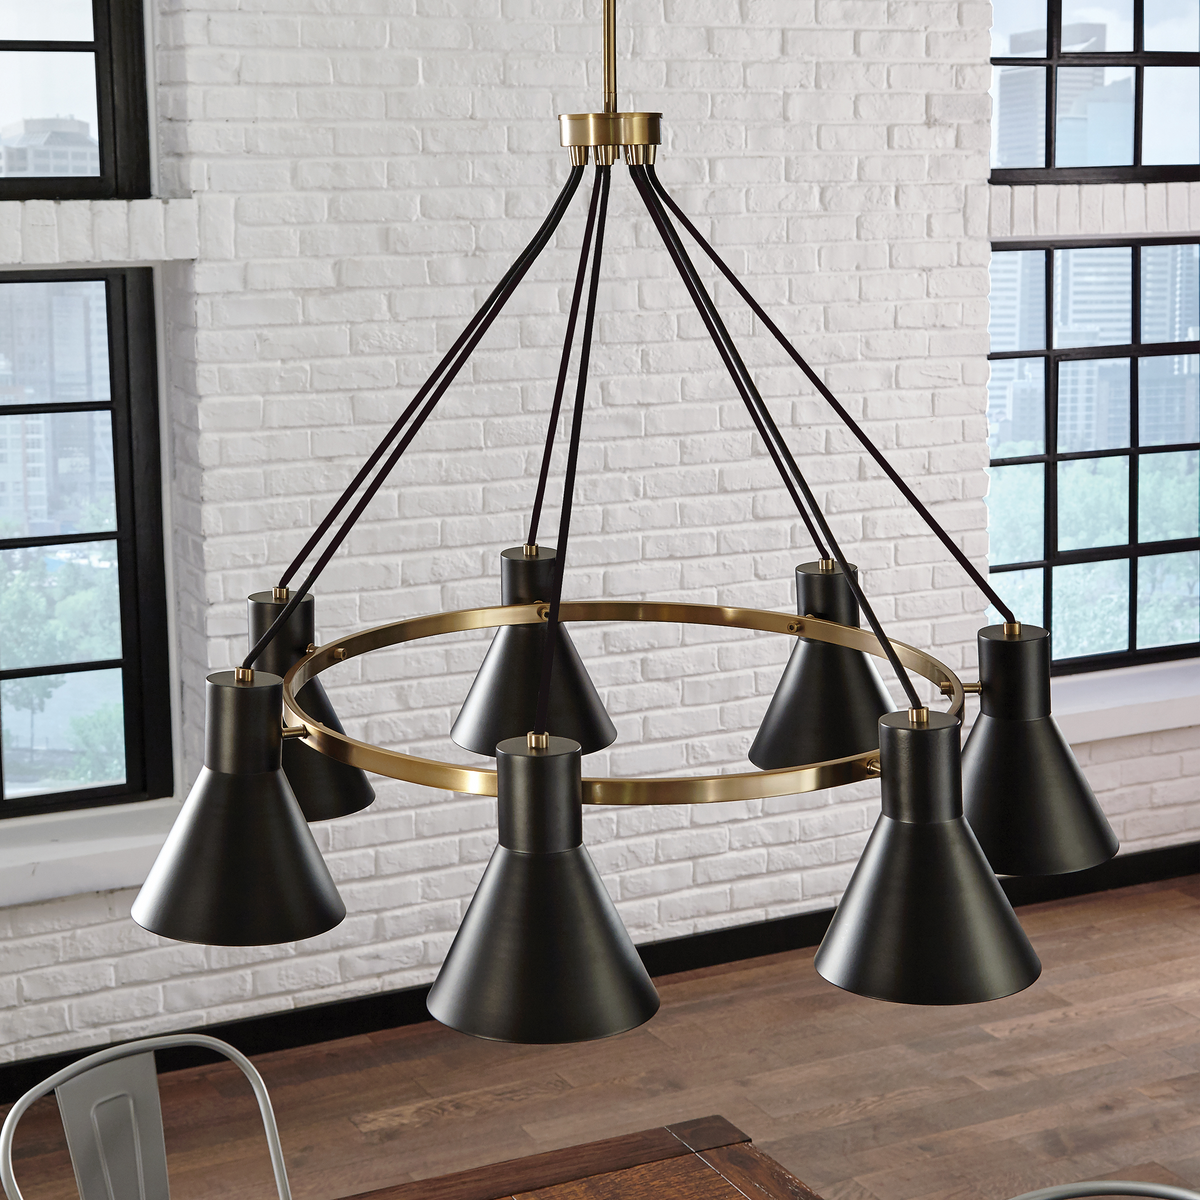 Towner Seven Light Chandelier Sea gull Collection